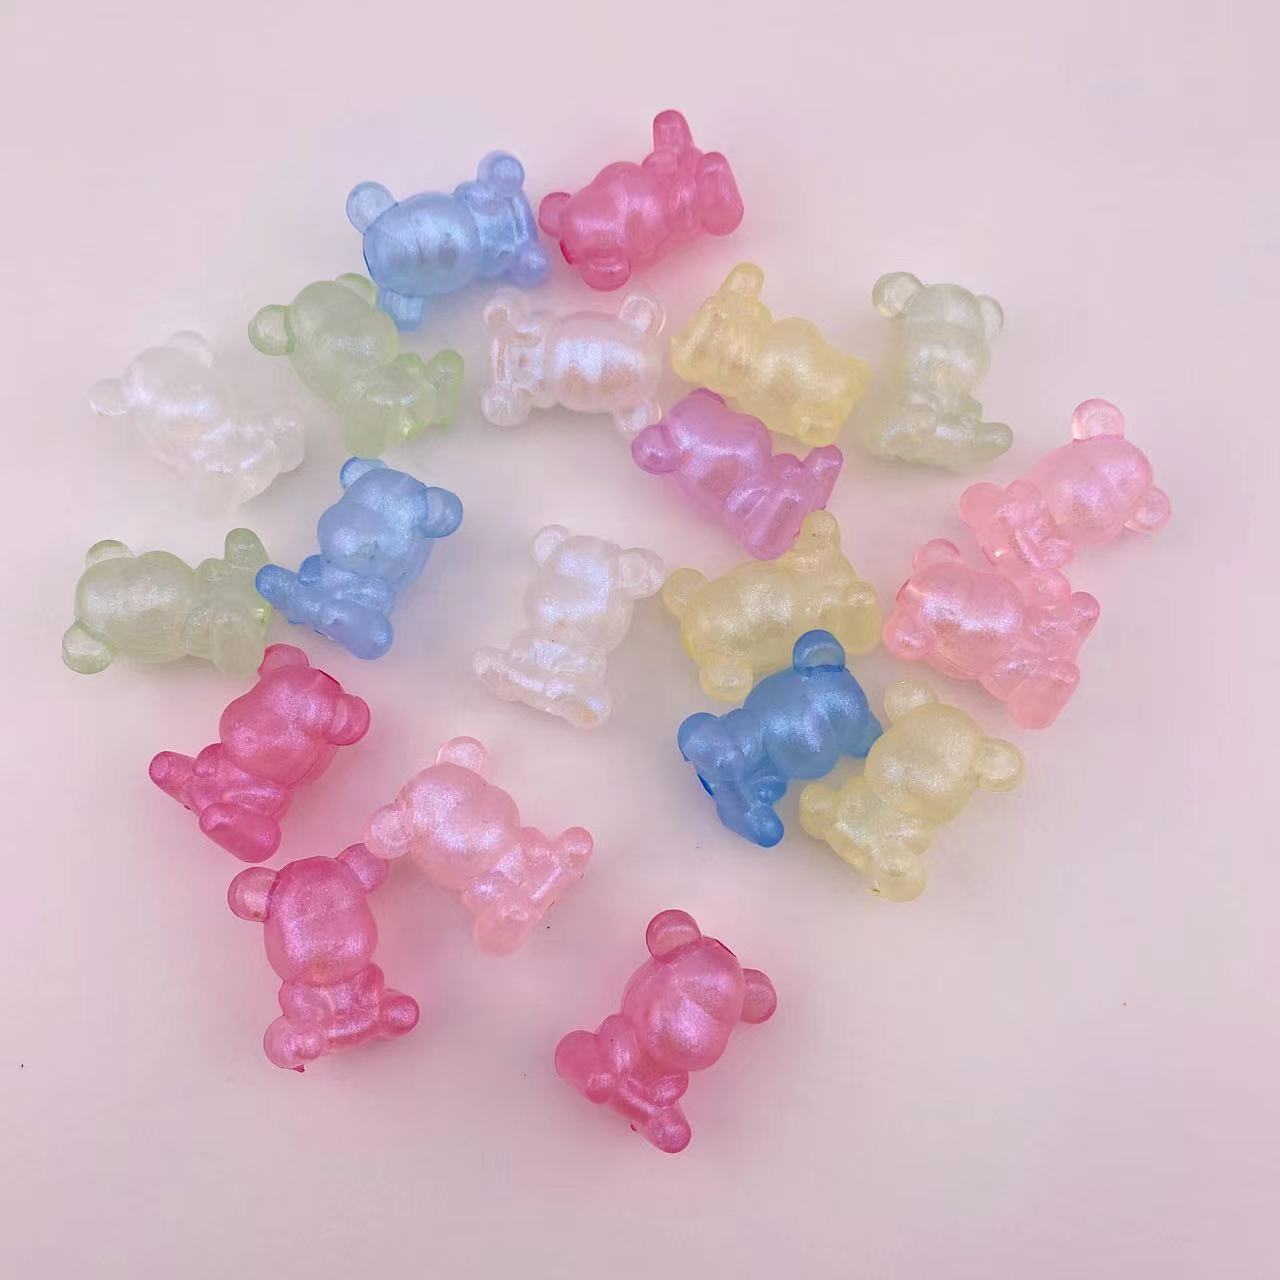 (A1)20 Pieces Glowing Bear Resin Beads